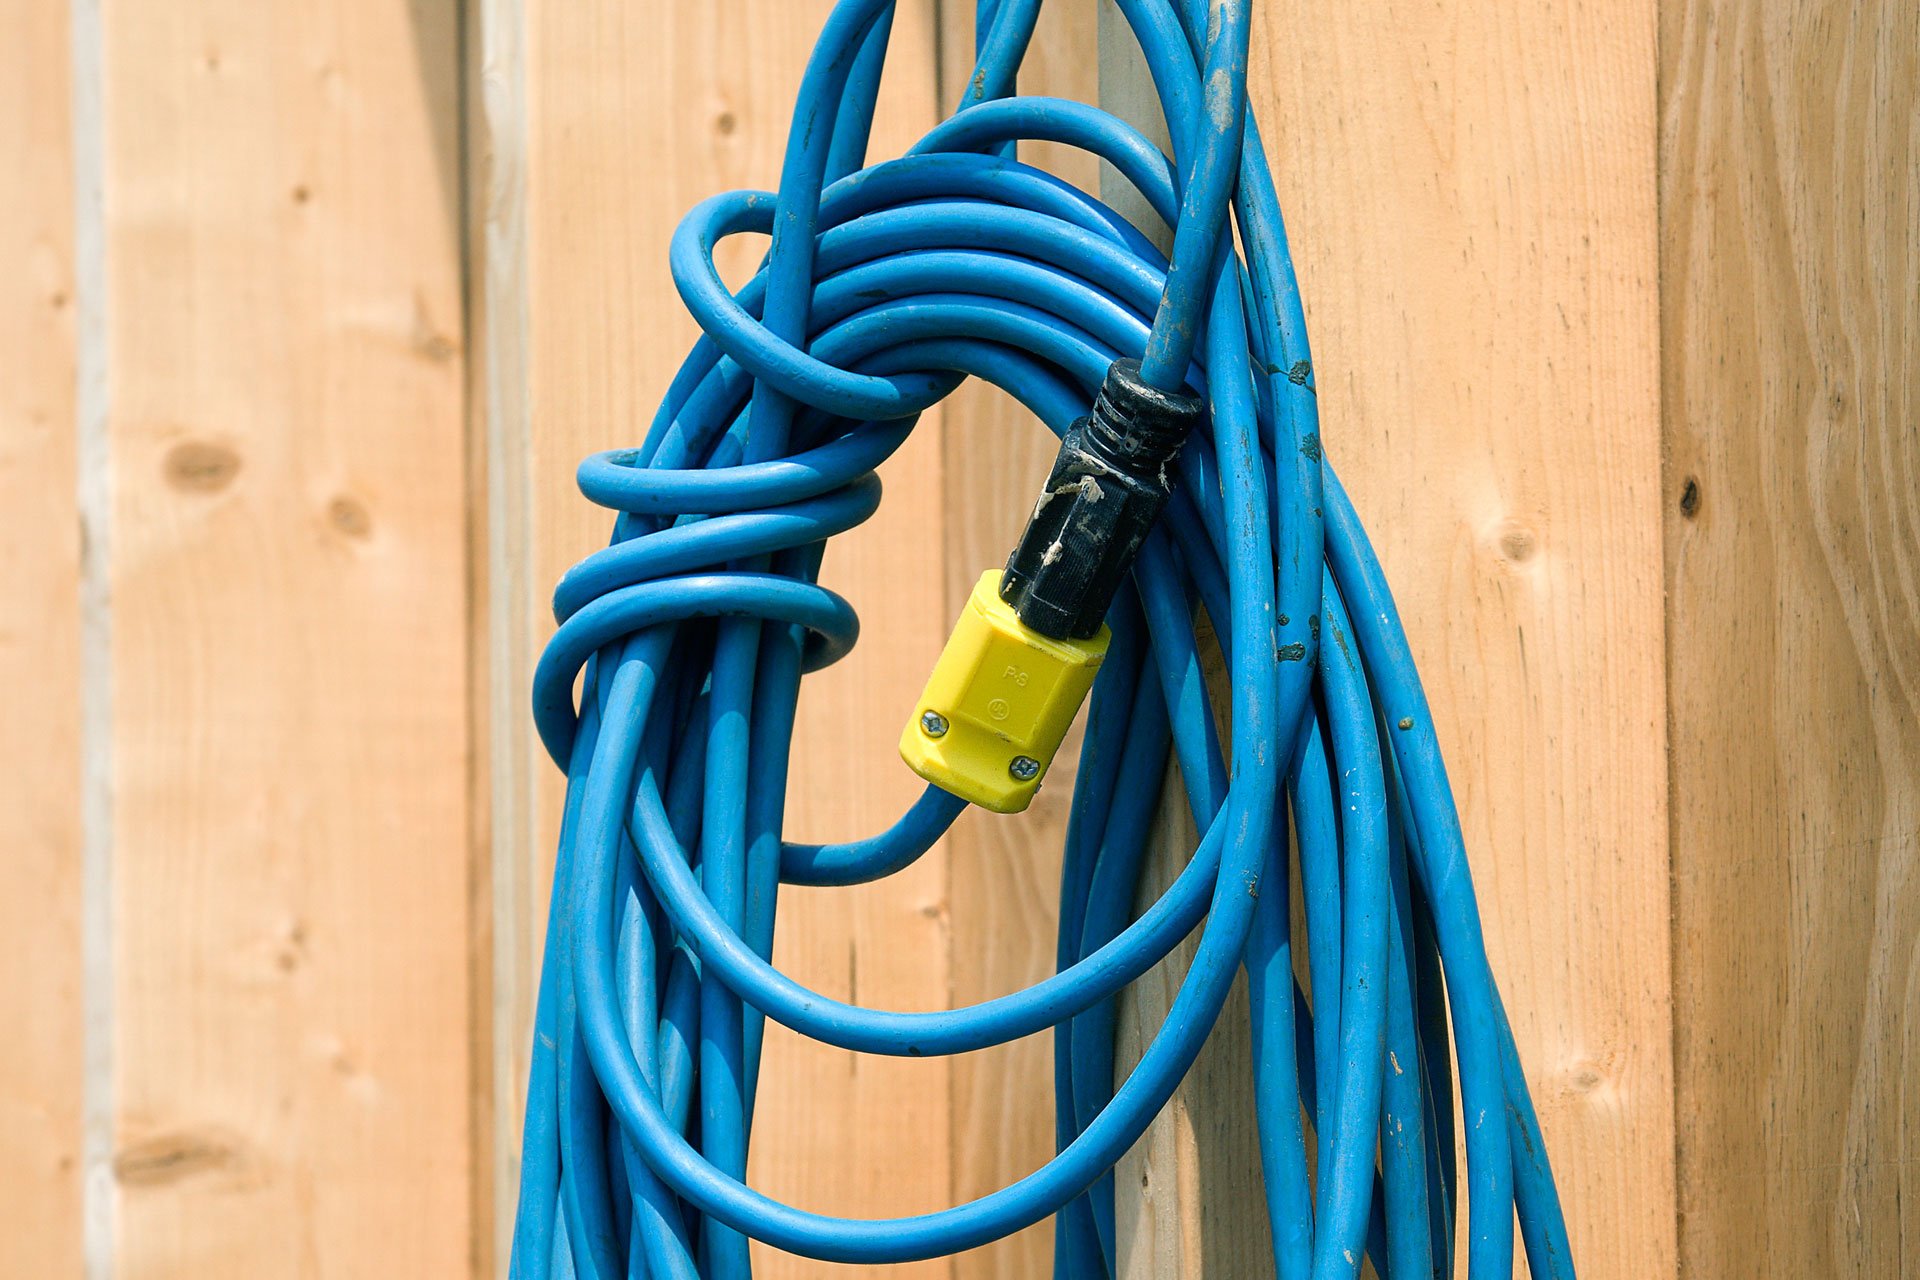 Indoor/Outdoor Cord Covers & Organizers at